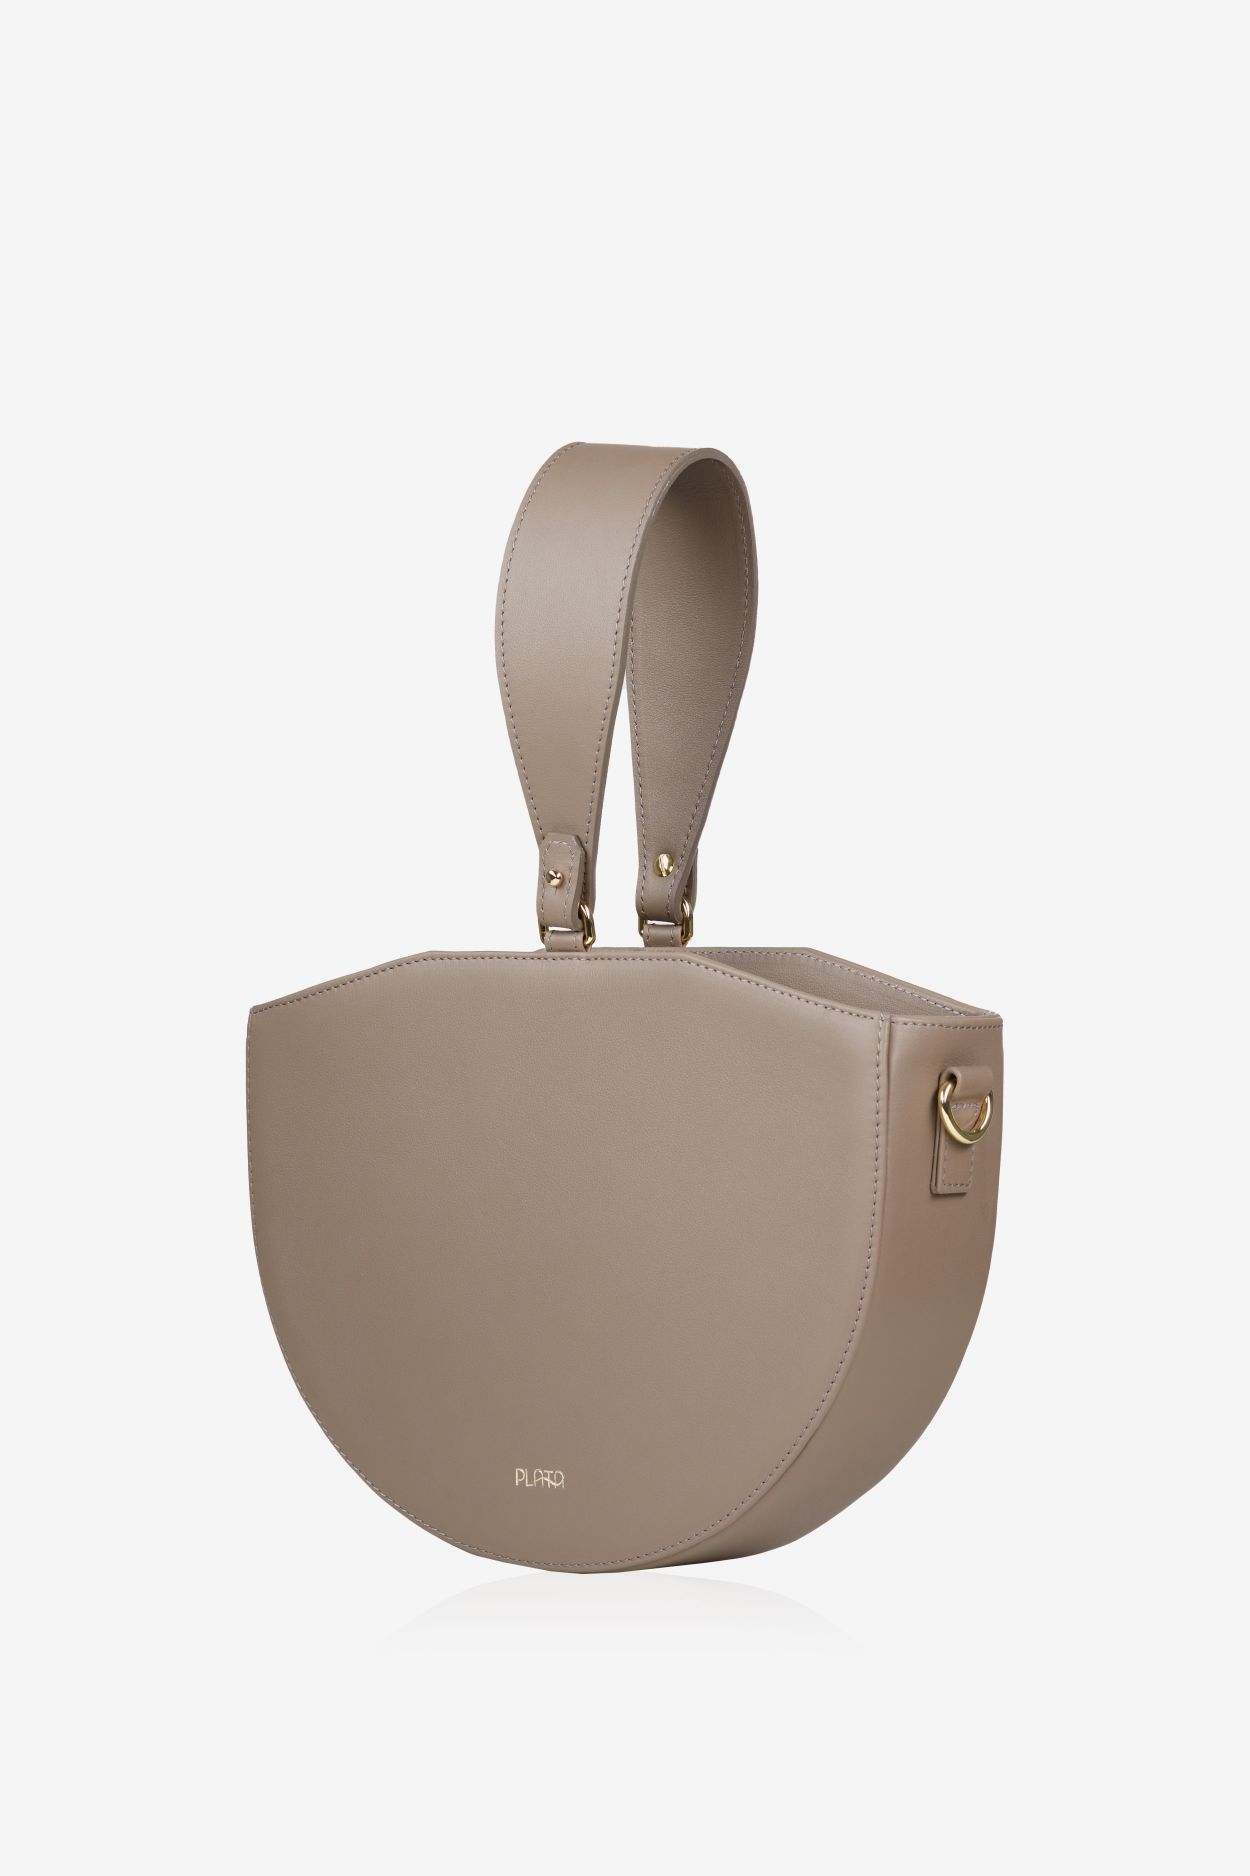 FRIDA leather handbag in beige from the side.